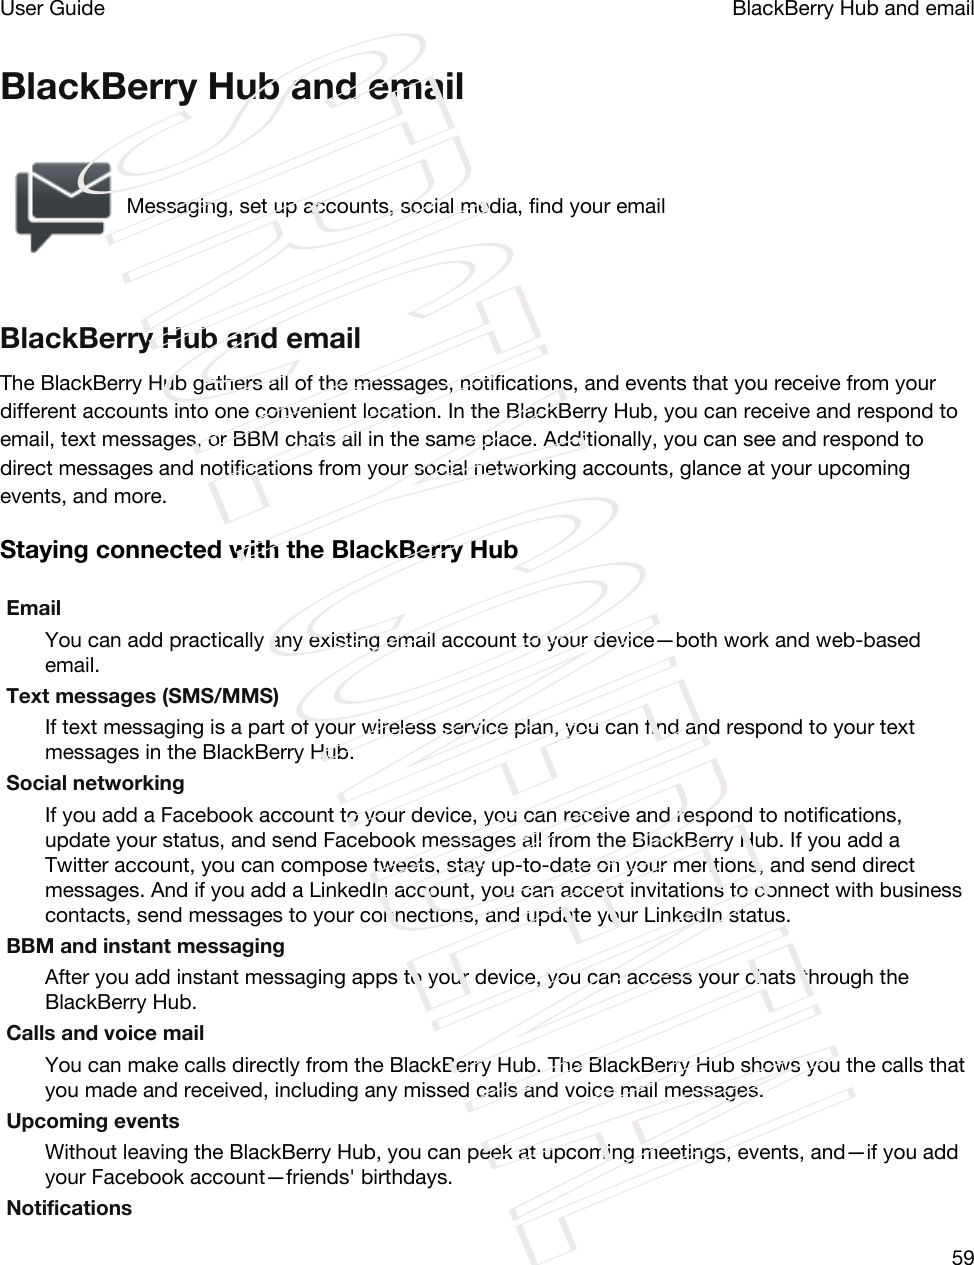 BlackBerry Hub and emailMessaging, set up accounts, social media, find your emailBlackBerry Hub and emailThe BlackBerry Hub gathers all of the messages, notifications, and events that you receive from your different accounts into one convenient location. In the BlackBerry Hub, you can receive and respond to email, text messages, or BBM chats all in the same place. Additionally, you can see and respond to direct messages and notifications from your social networking accounts, glance at your upcoming events, and more.Staying connected with the BlackBerry HubEmailYou can add practically any existing email account to your device—both work and web-based email.Text messages (SMS/MMS)If text messaging is a part of your wireless service plan, you can find and respond to your text messages in the BlackBerry Hub.Social networkingIf you add a Facebook account to your device, you can receive and respond to notifications, update your status, and send Facebook messages all from the BlackBerry Hub. If you add a Twitter account, you can compose tweets, stay up-to-date on your mentions, and send direct messages. And if you add a LinkedIn account, you can accept invitations to connect with business contacts, send messages to your connections, and update your LinkedIn status.BBM and instant messagingAfter you add instant messaging apps to your device, you can access your chats through the BlackBerry Hub.Calls and voice mailYou can make calls directly from the BlackBerry Hub. The BlackBerry Hub shows you the calls that you made and received, including any missed calls and voice mail messages.Upcoming eventsWithout leaving the BlackBerry Hub, you can peek at upcoming meetings, events, and—if you add your Facebook account—friends&apos; birthdays.NotificationsBlackBerry Hub and emailUser Guide59STRICTLY CONFIDENTIAL